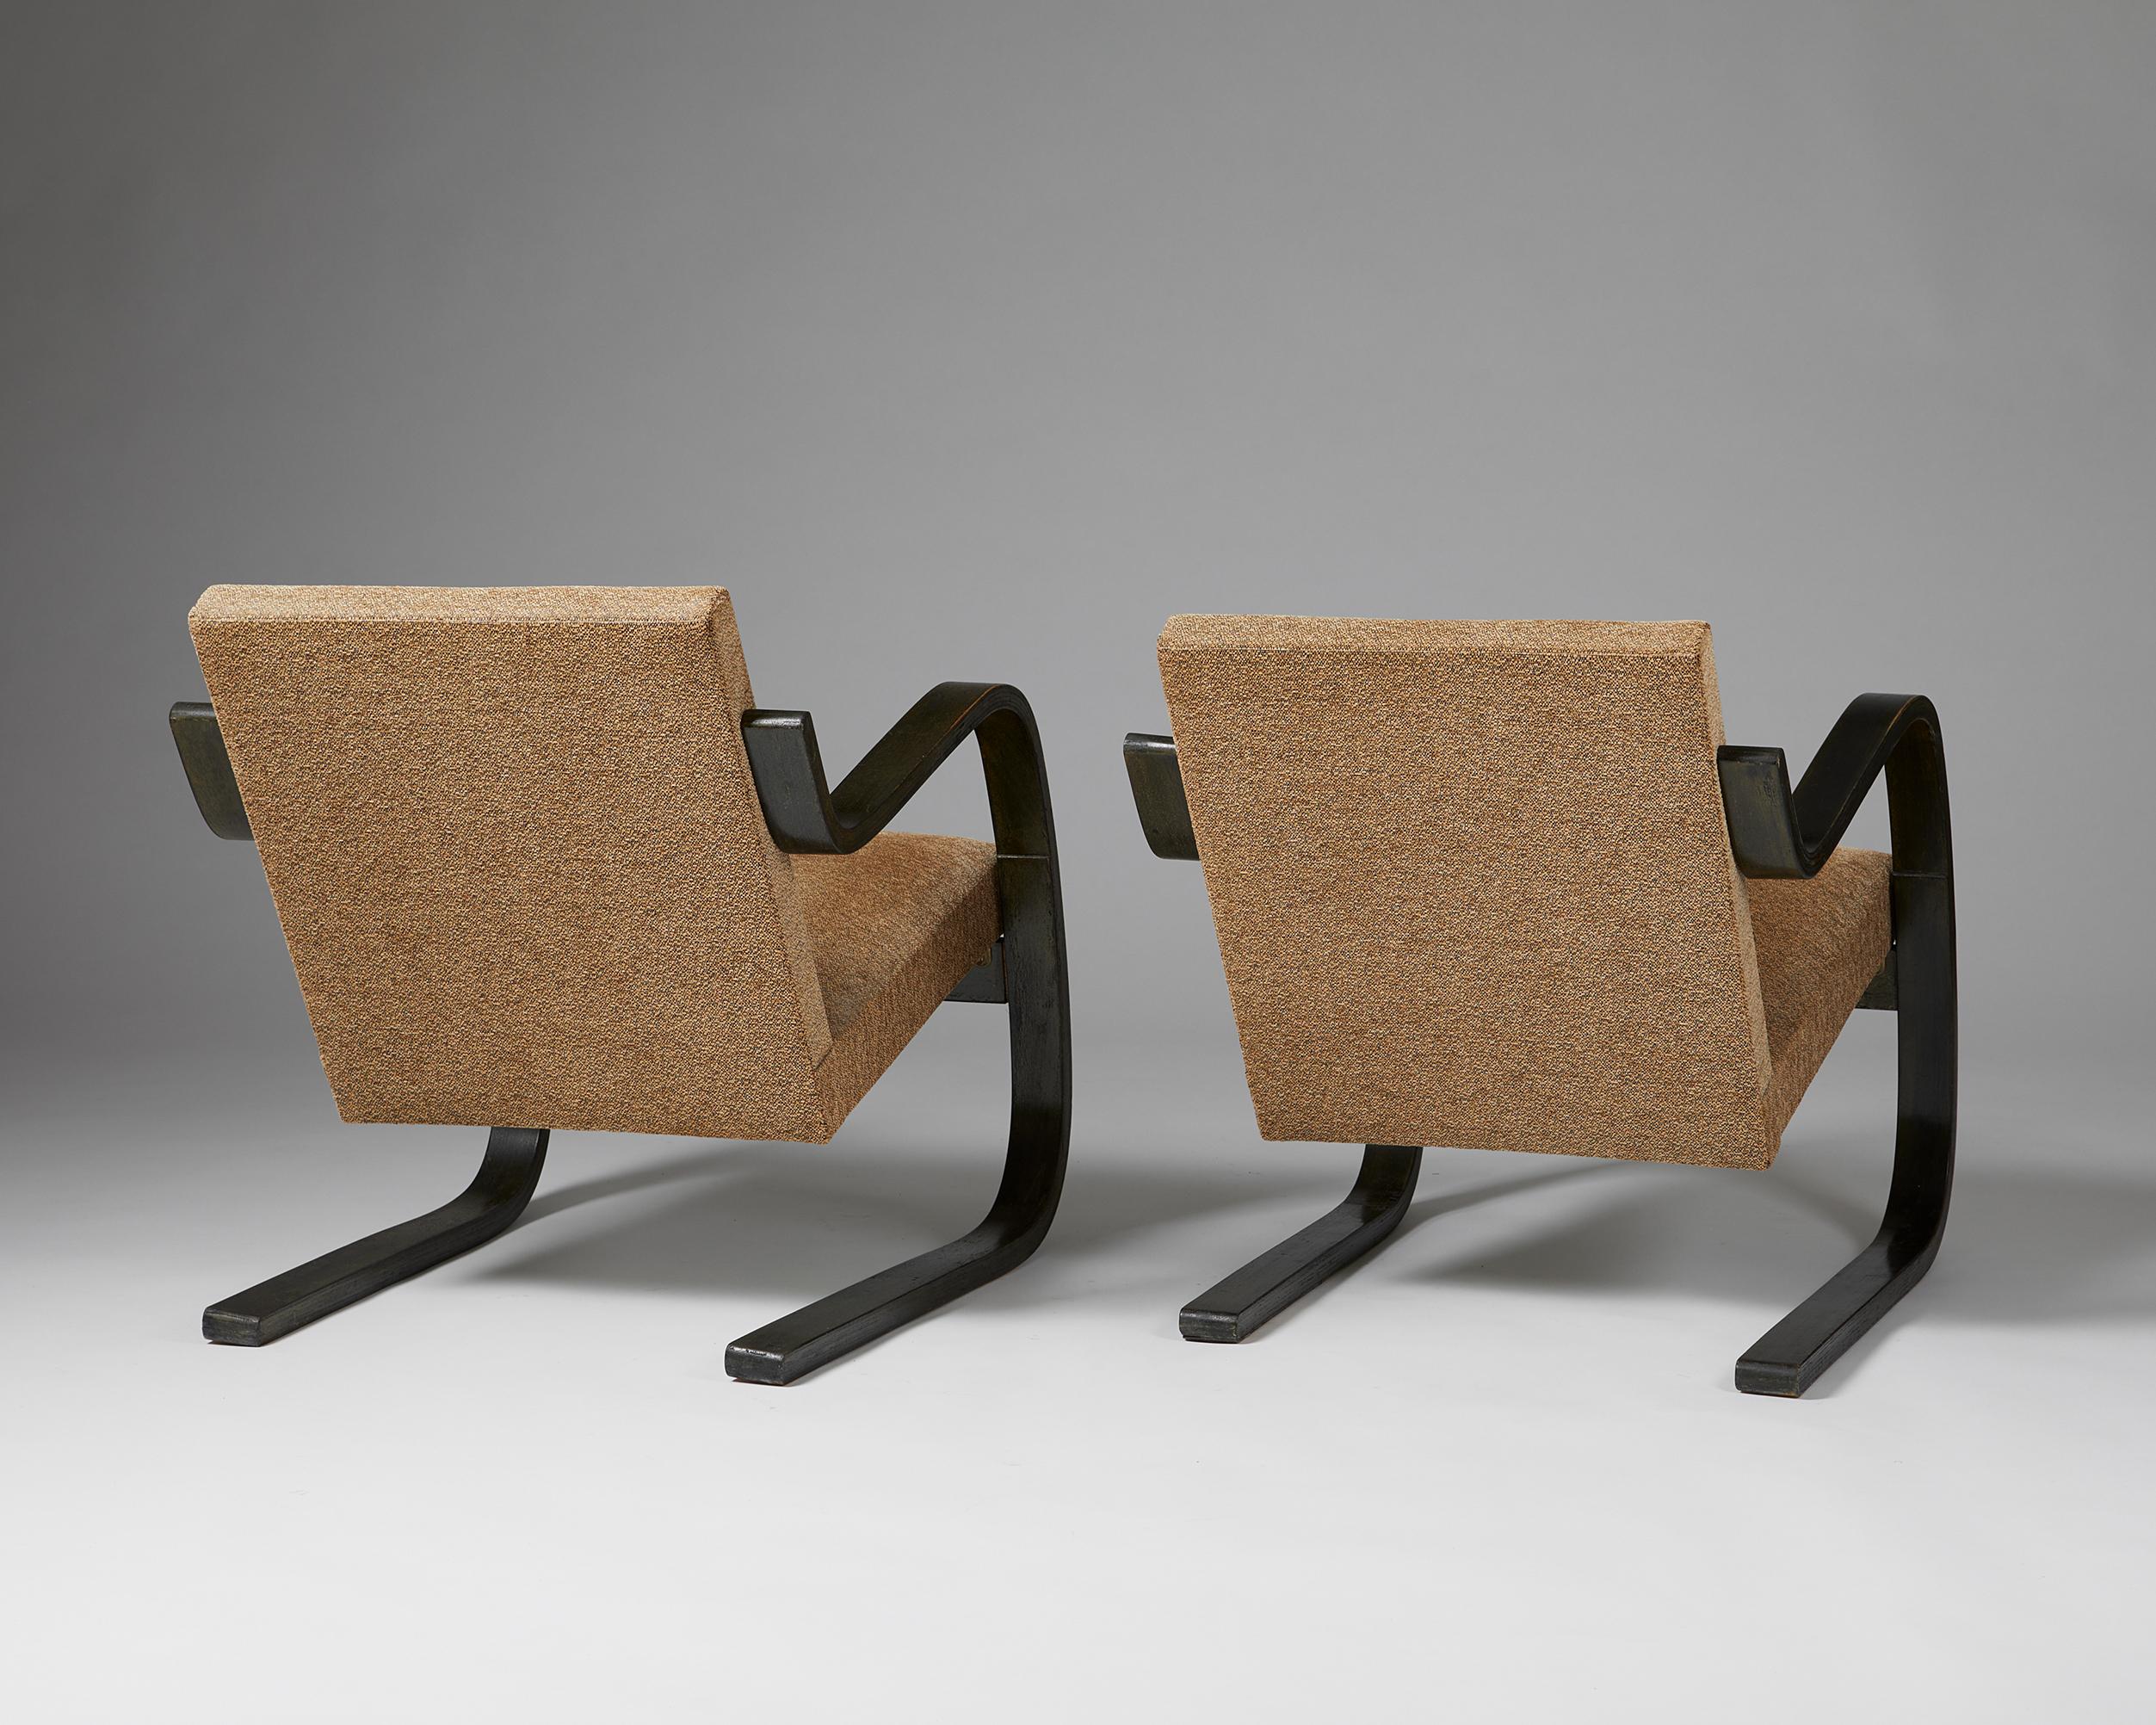 Fabric Pair of Chairs ‘Model 34’ Designed by Alvar Aalto for Artek, Finland, 1930's